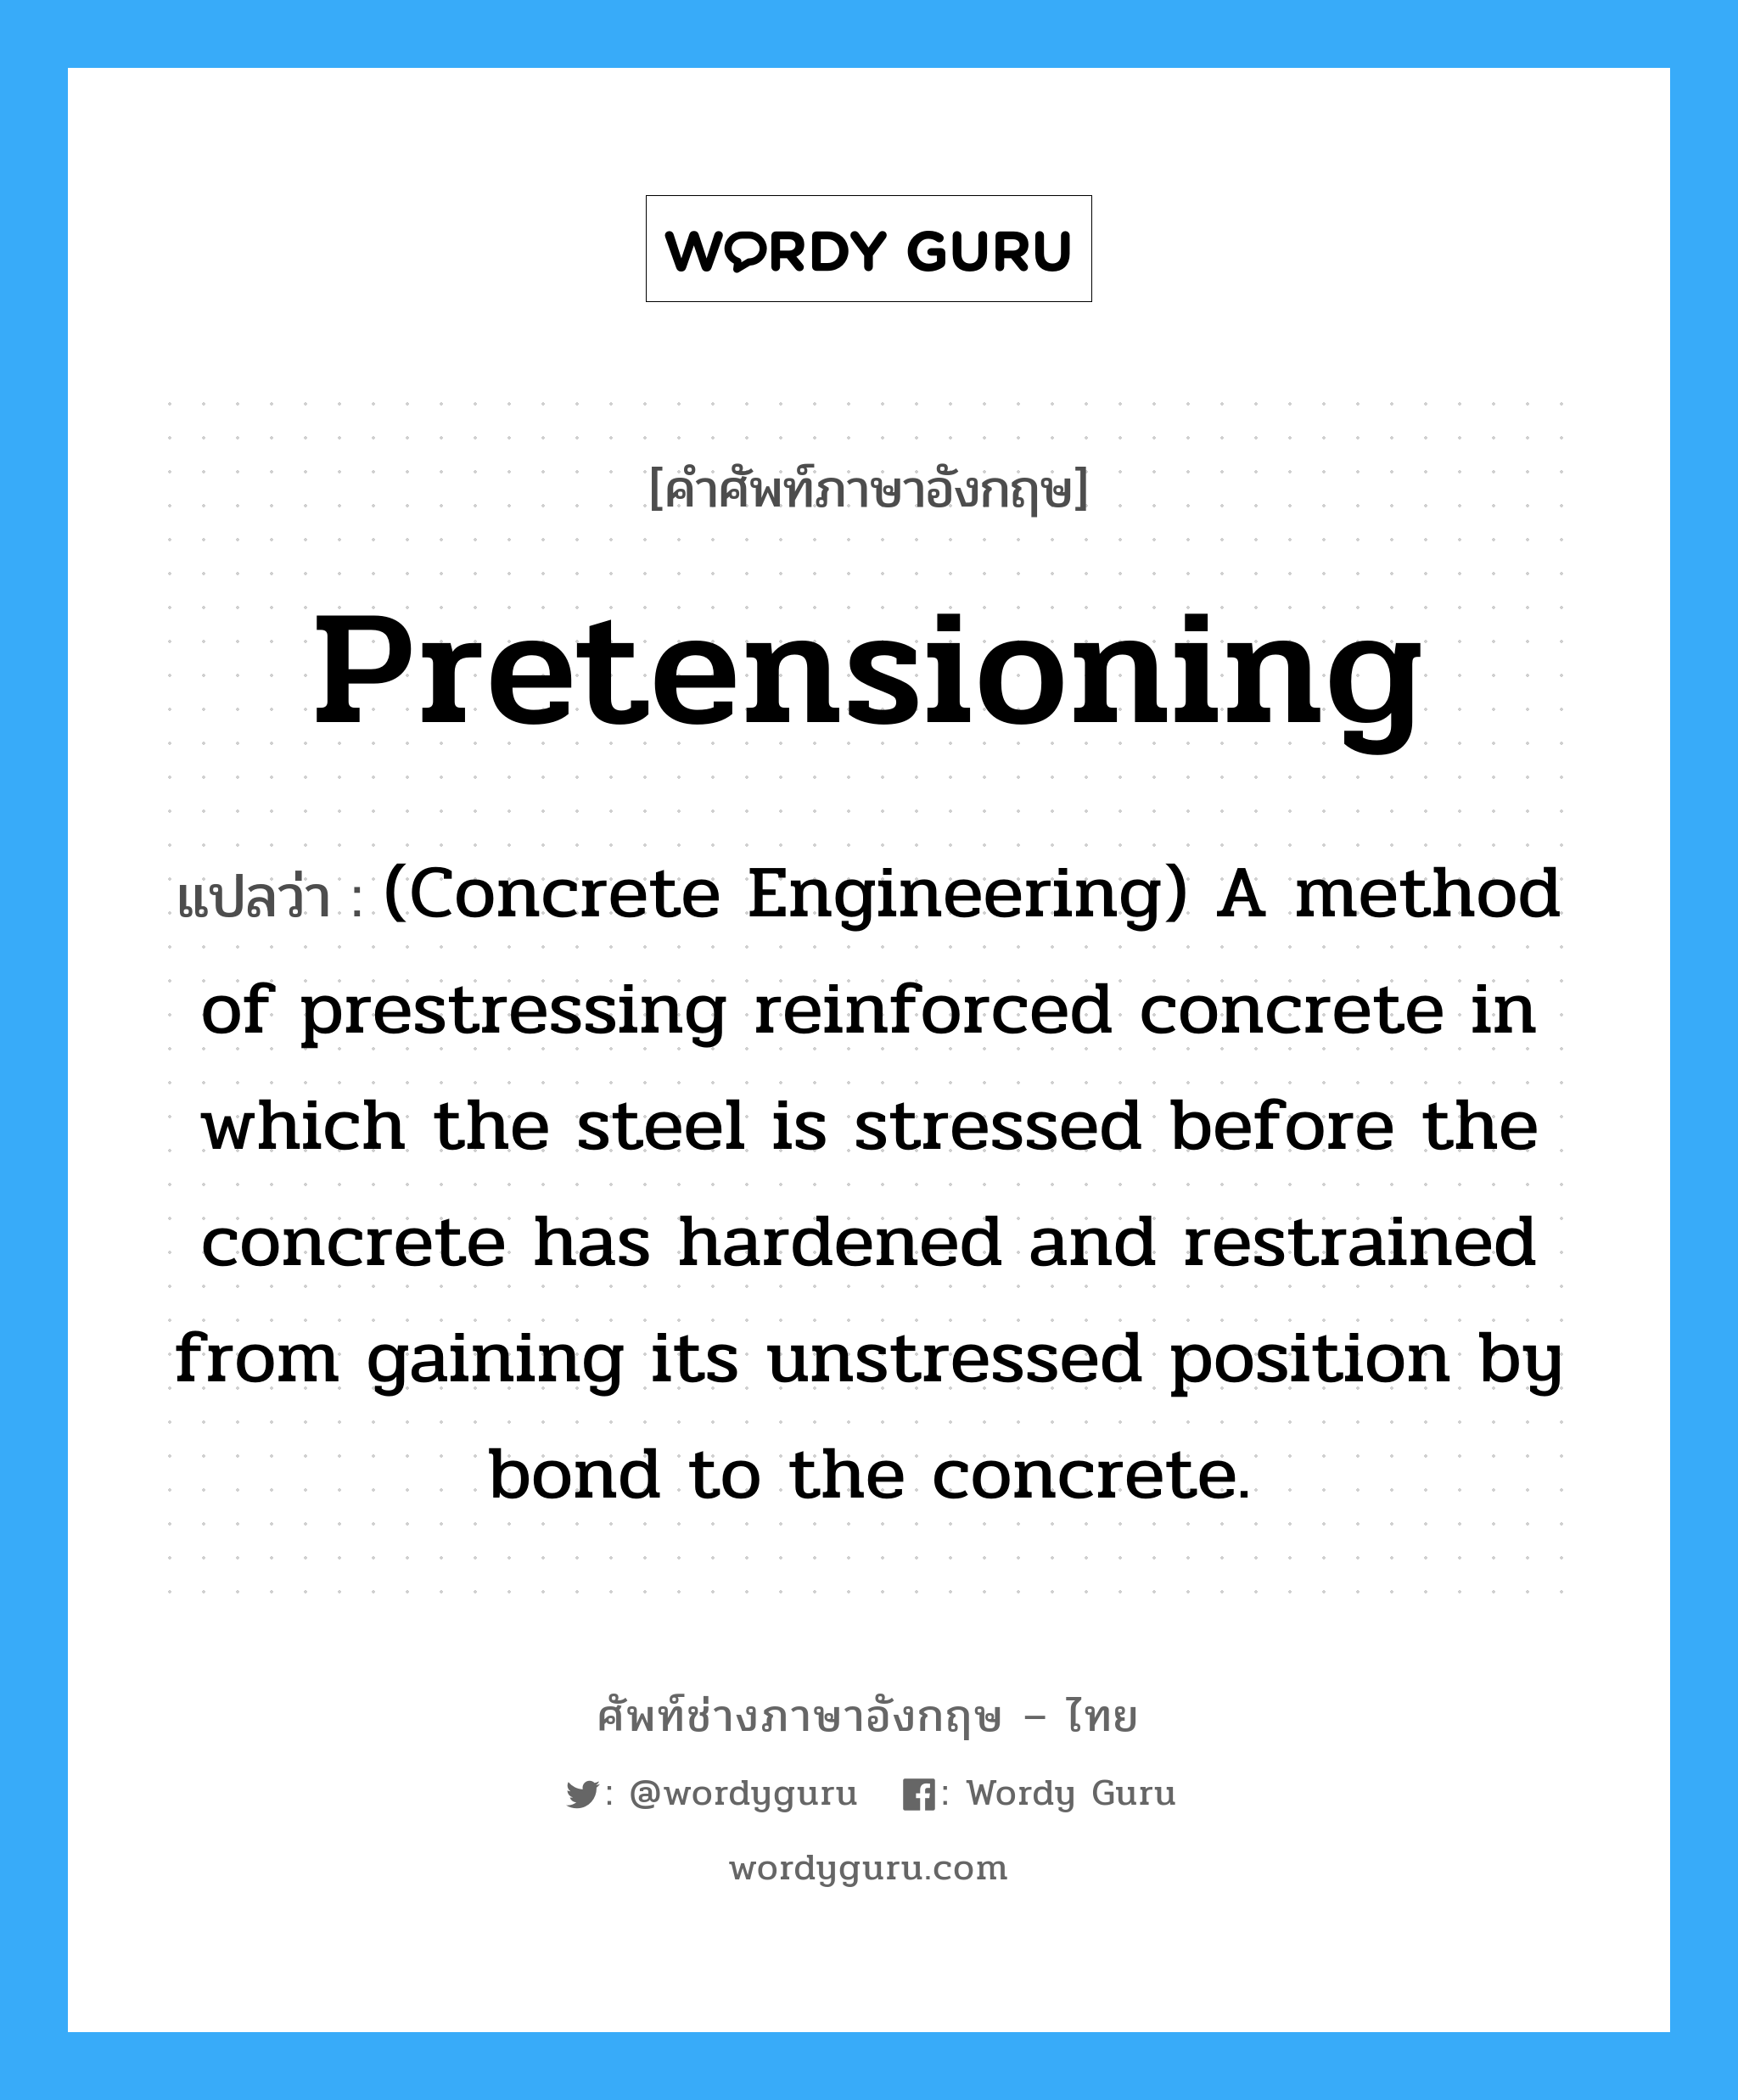 Pretensioning แปลว่า?, คำศัพท์ช่างภาษาอังกฤษ - ไทย Pretensioning คำศัพท์ภาษาอังกฤษ Pretensioning แปลว่า (Concrete Engineering) A method of prestressing reinforced concrete in which the steel is stressed before the concrete has hardened and restrained from gaining its unstressed position by bond to the concrete.